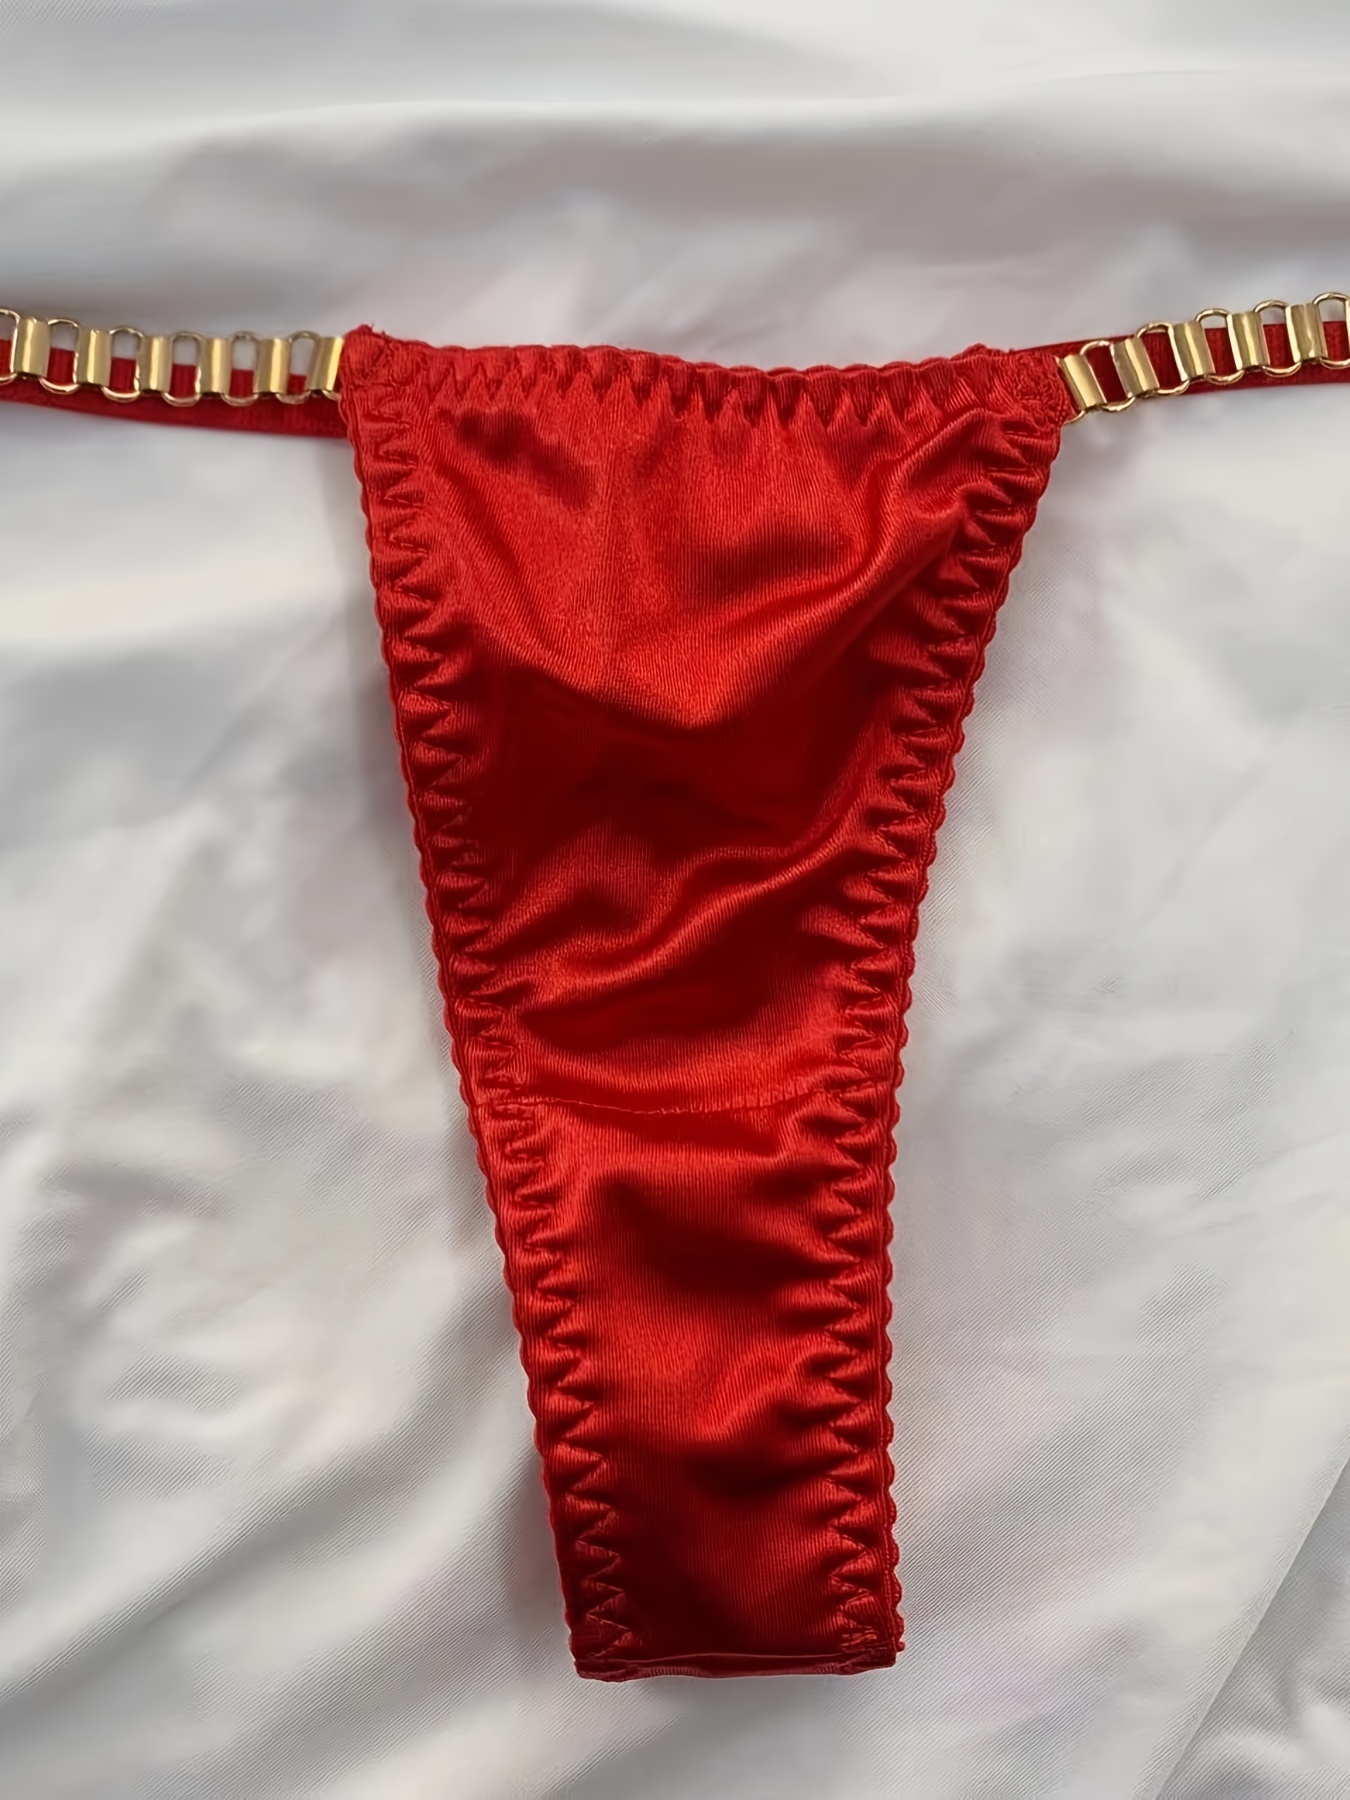 Metal Chain Linked Thong for Sale New Zealand, New Collection Online